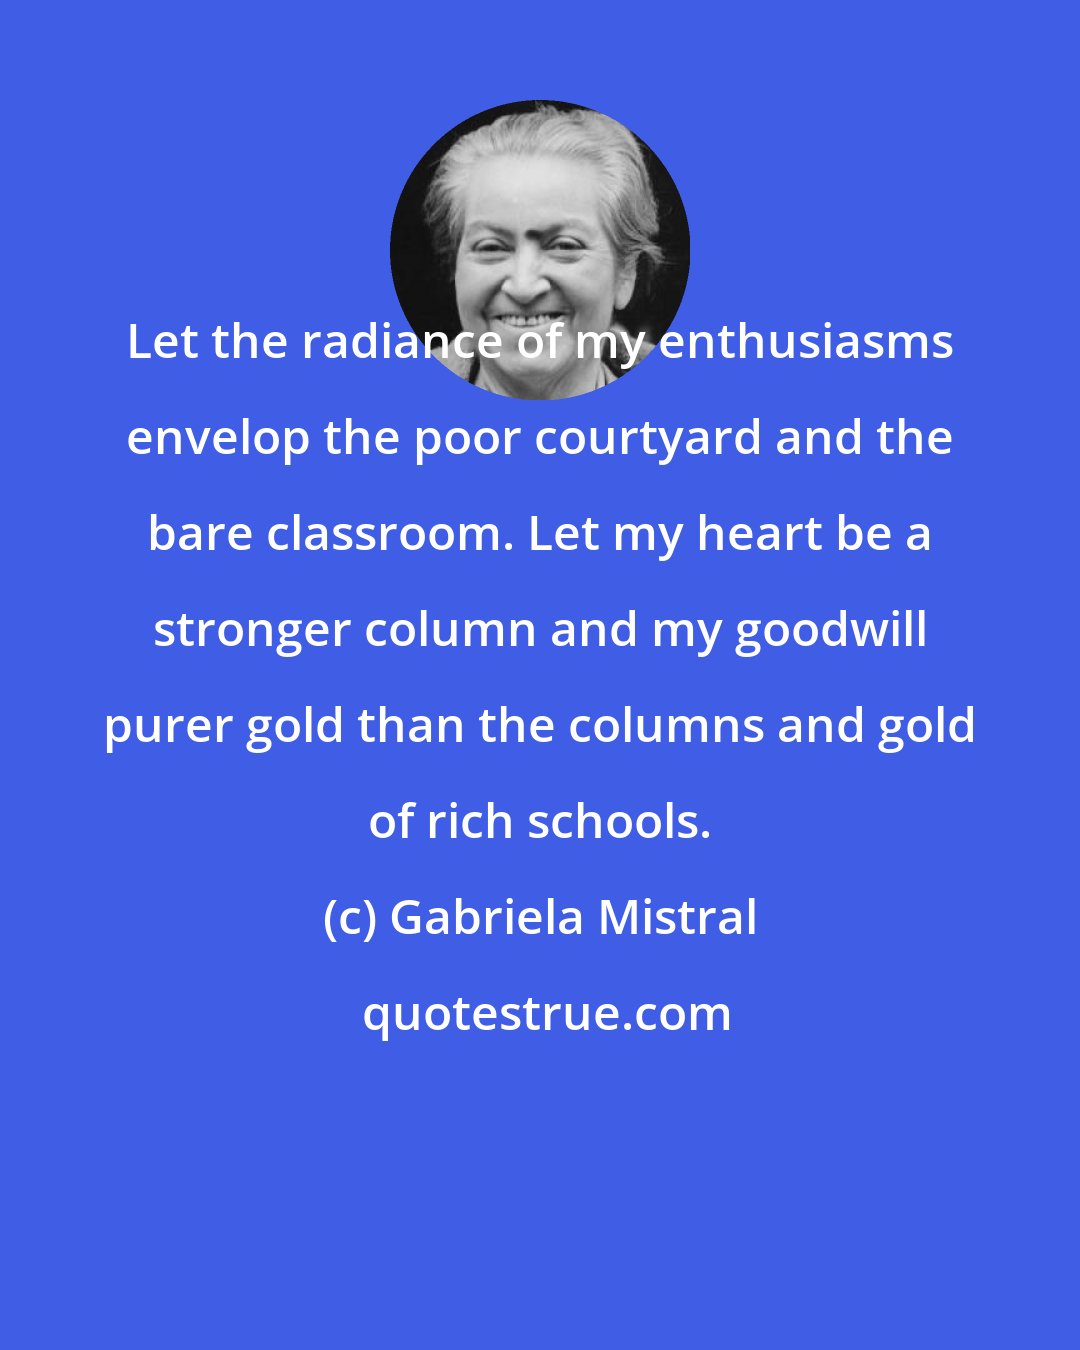 Gabriela Mistral: Let the radiance of my enthusiasms envelop the poor courtyard and the bare classroom. Let my heart be a stronger column and my goodwill purer gold than the columns and gold of rich schools.